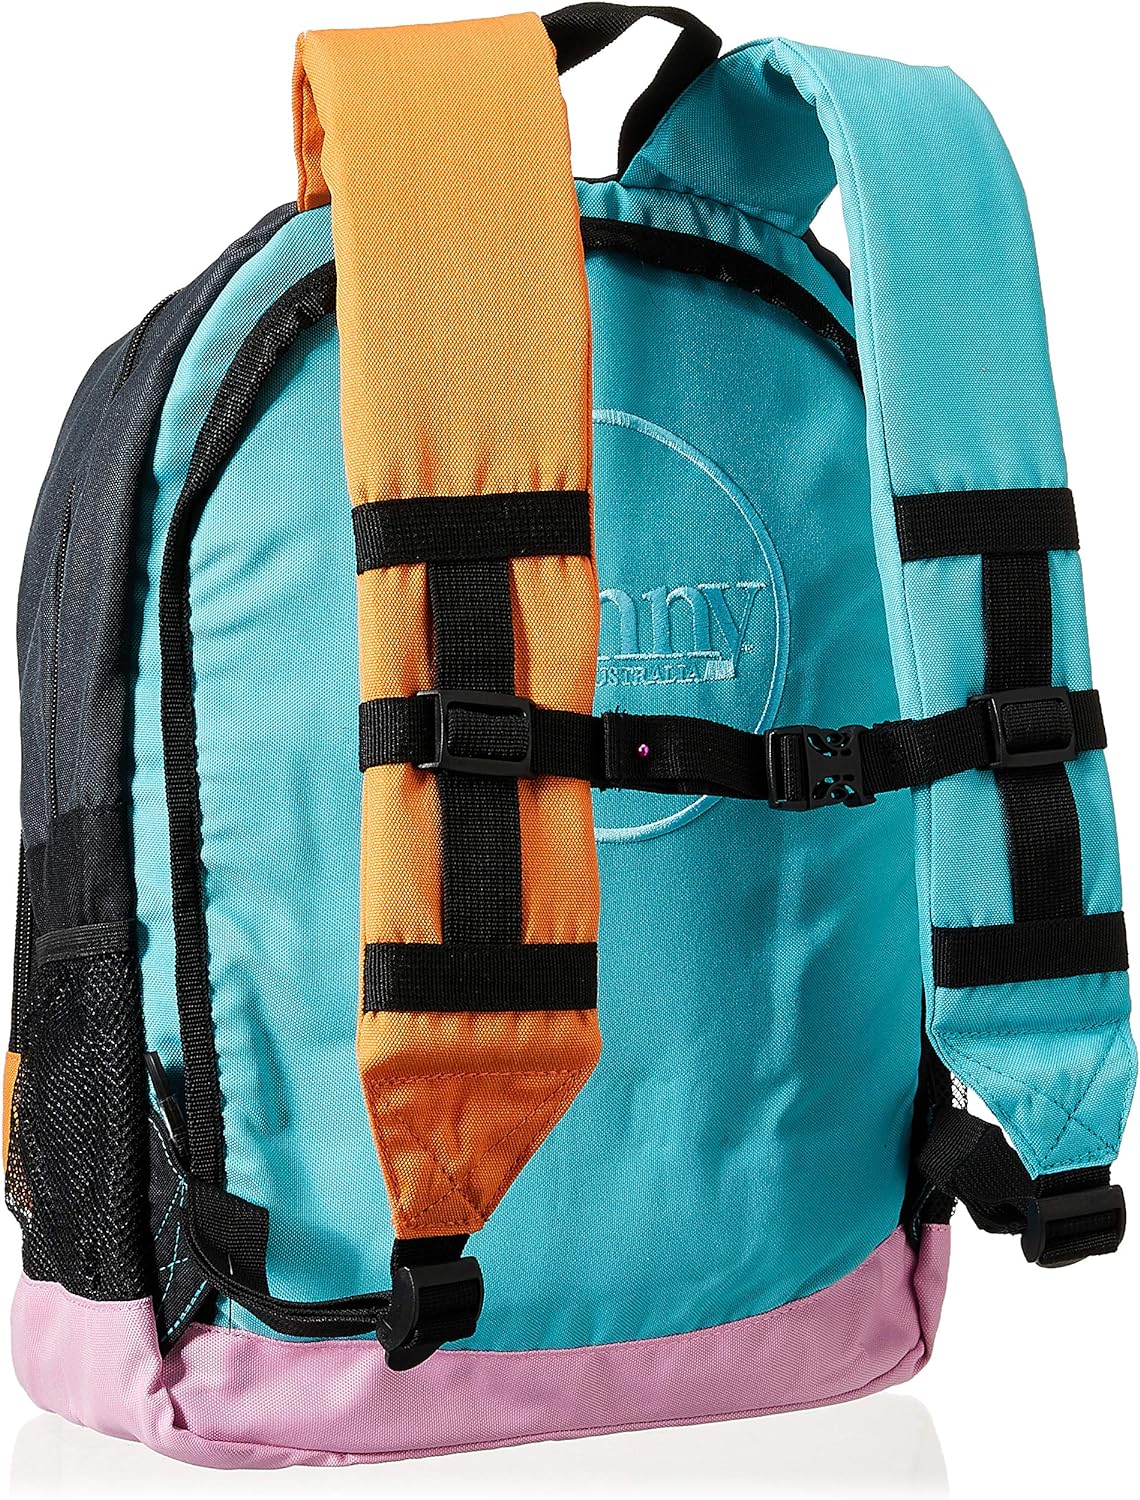 Penny Pouch Pastel Backpack Bag